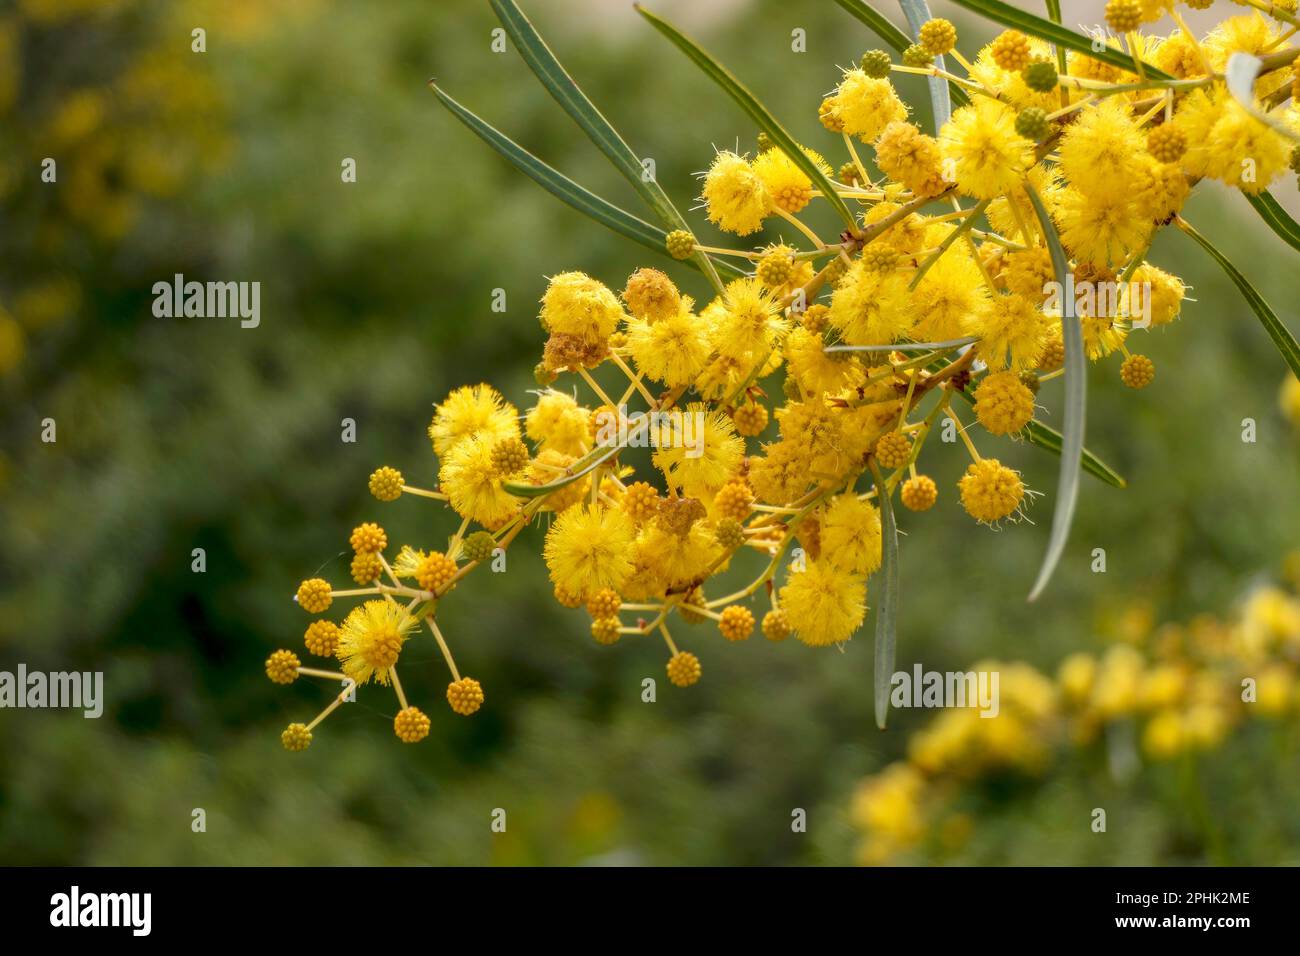 Yellow ball flowers of a flowering tree Acacia saligna close up on a blurred background Stock Photo